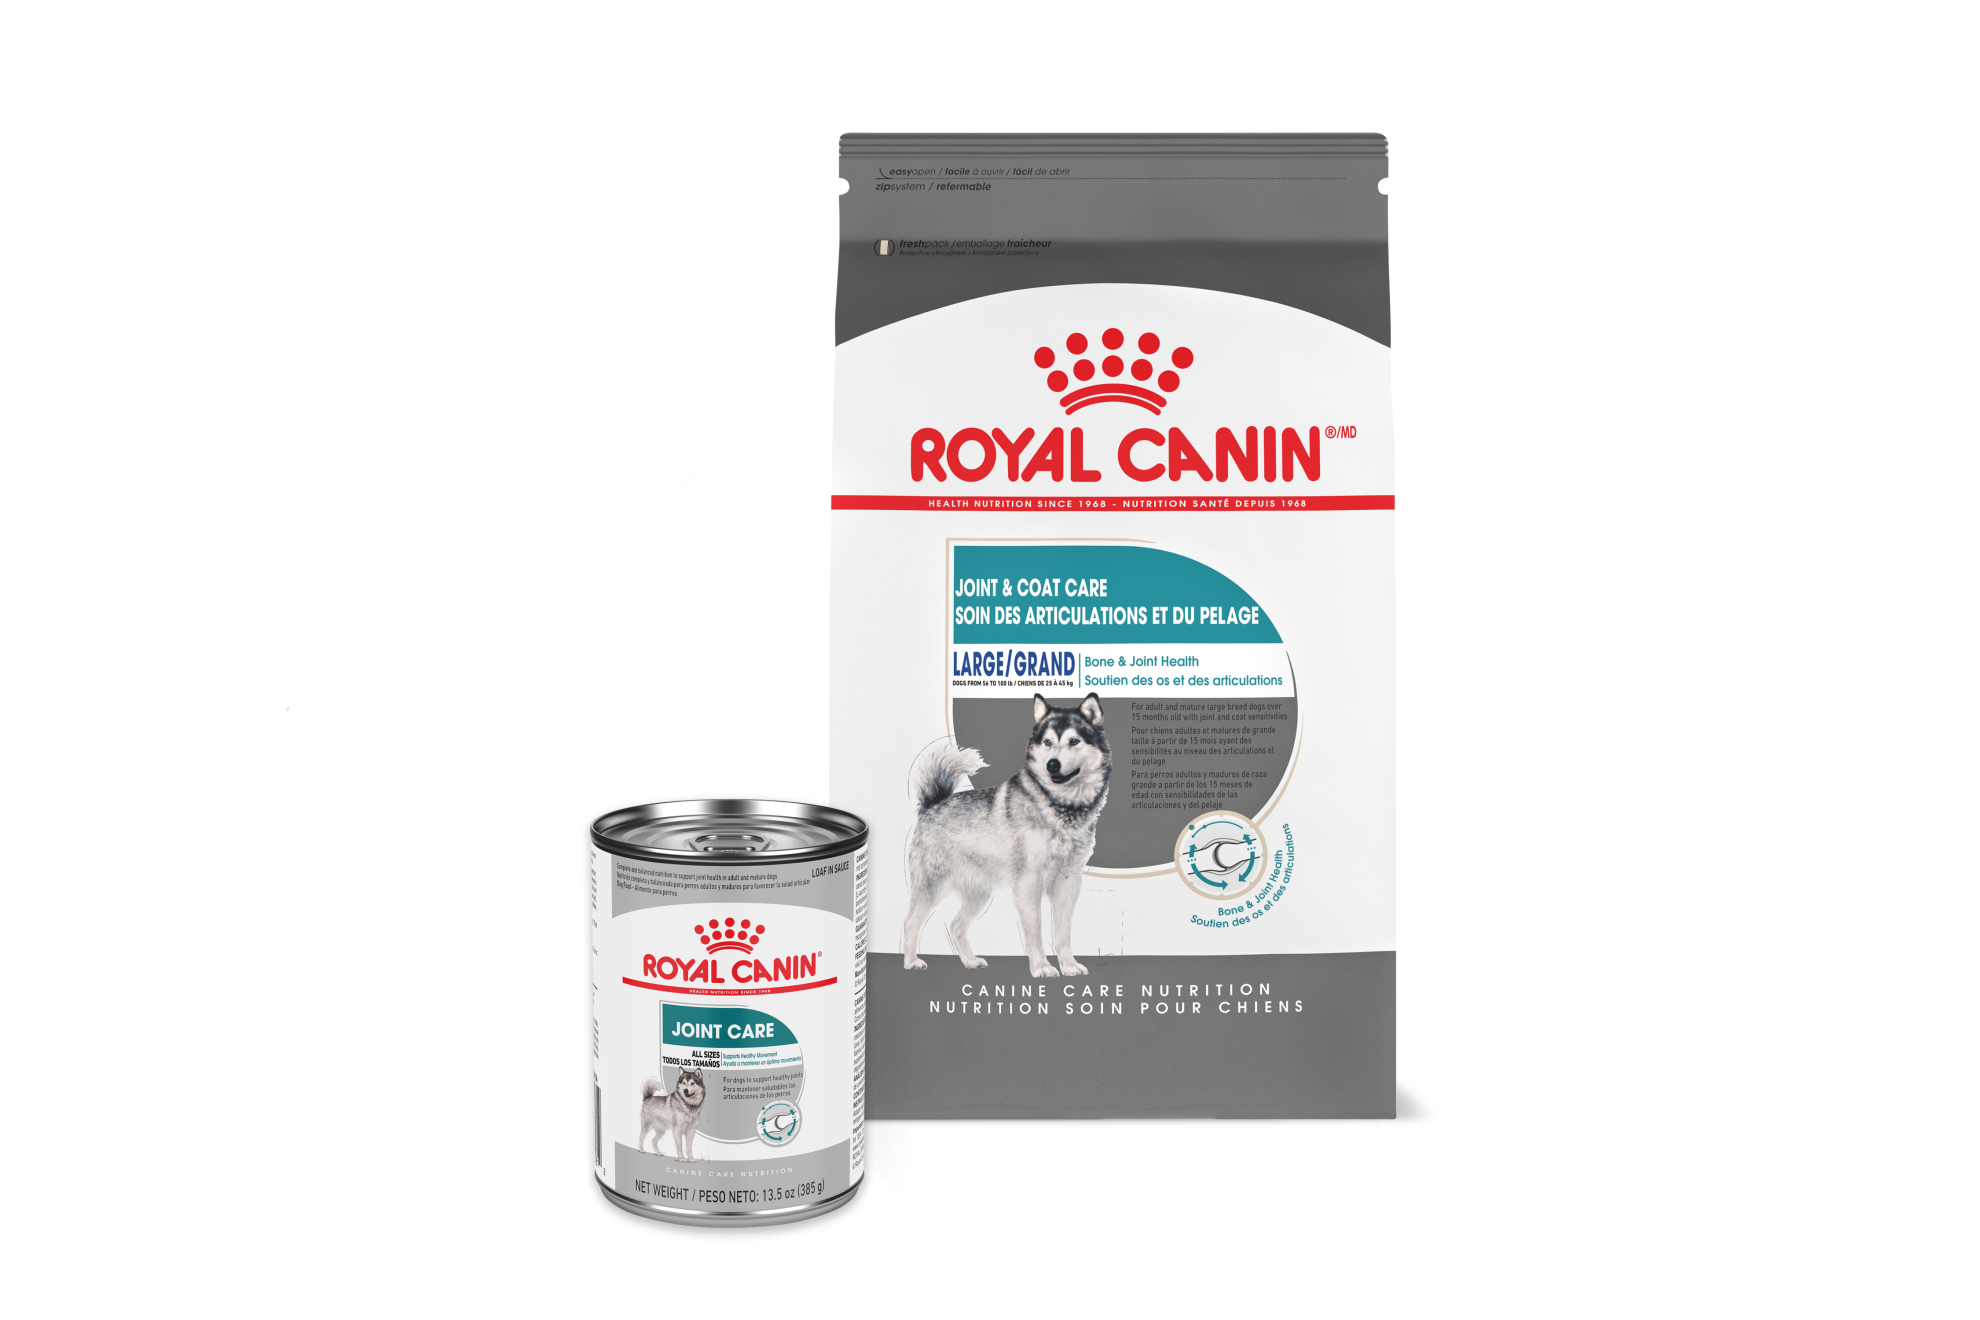 Royal Canin Joint Care Dog Food